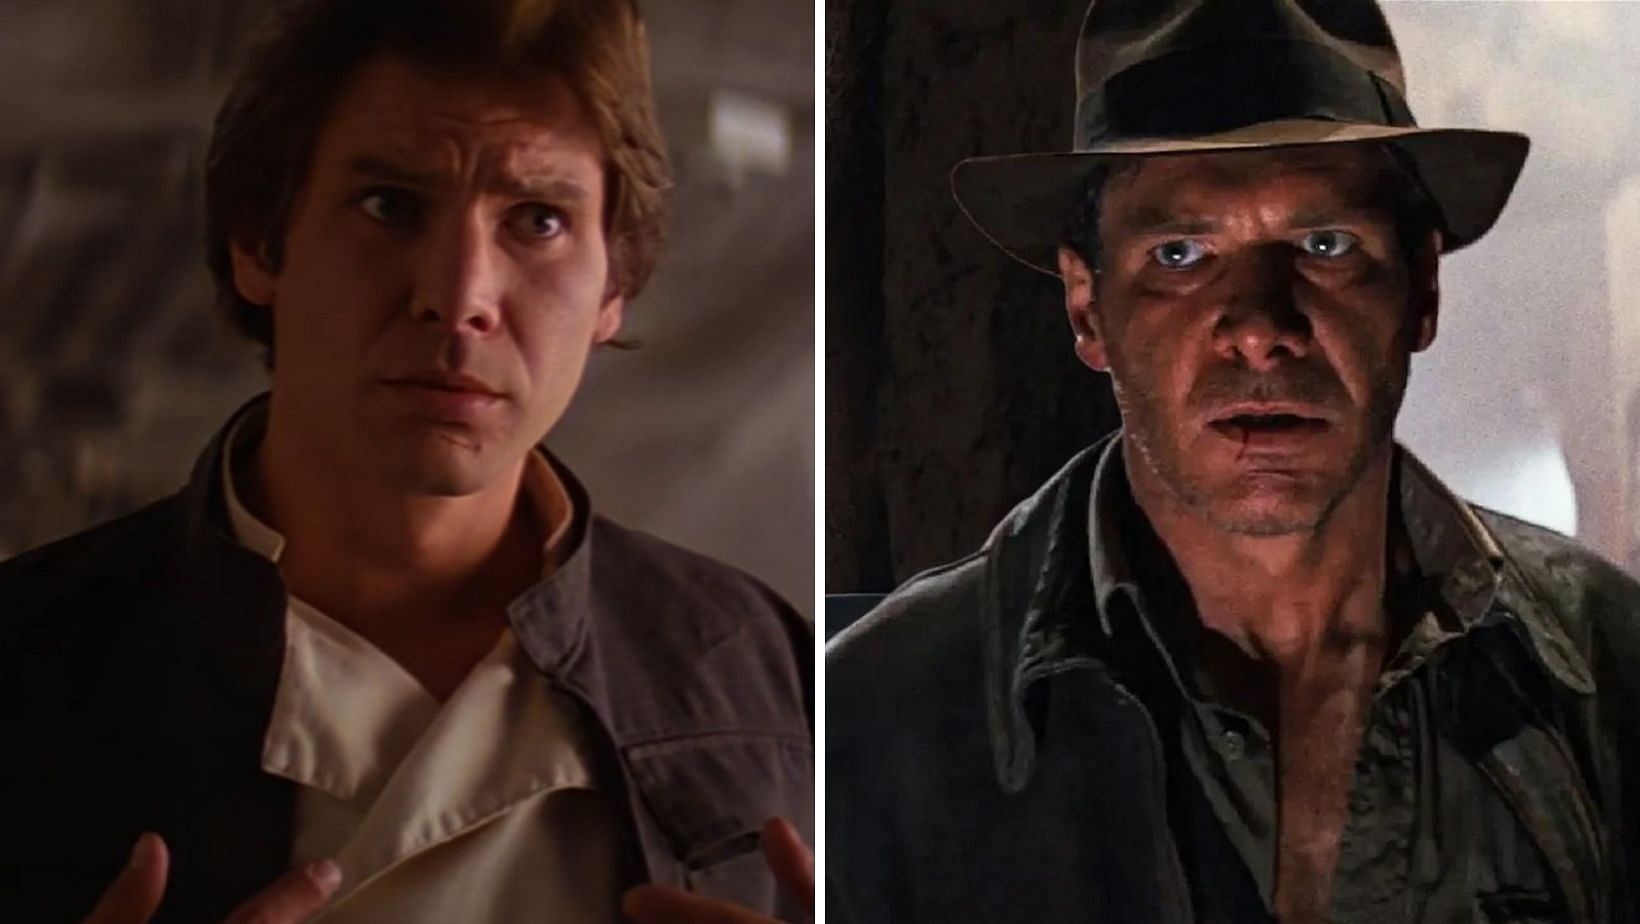 Harrison Ford as Han Solo in Star Wars and Indiana Jones in Raiders of the Lost Ark, two of his most iconic and charismatic roles (Image via Sportskeeda and Lucasfilm)